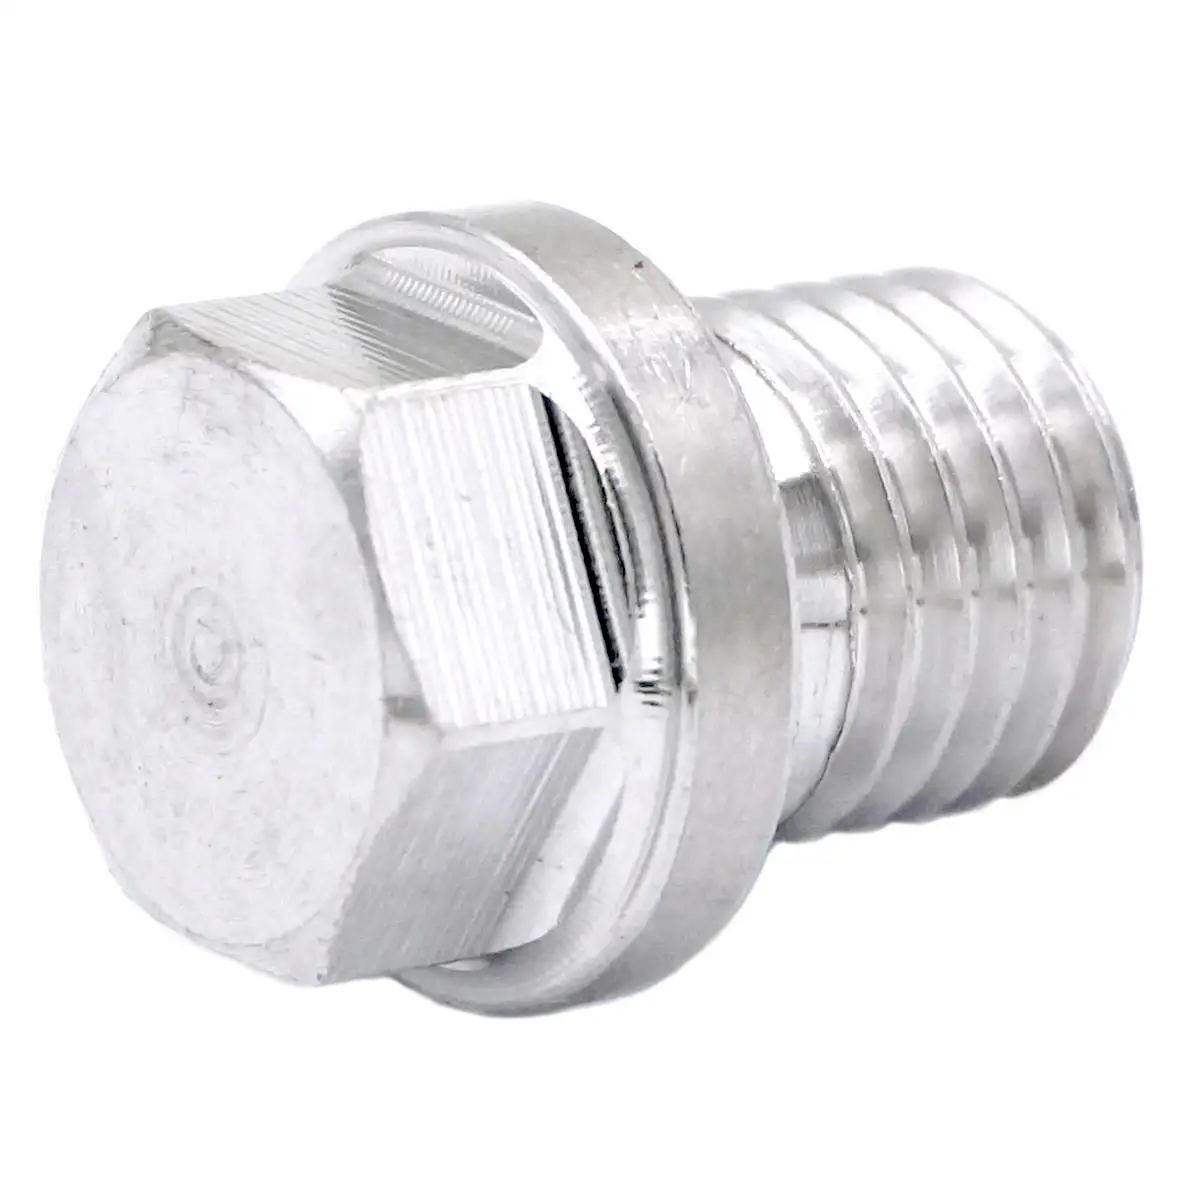 

M8 M10 M12 M14 M16 M18 M20 M22 M24 M27 M30 M33 M36 Metric Male 304 Stainless Countersunk Hex Socket End Plug With Flange